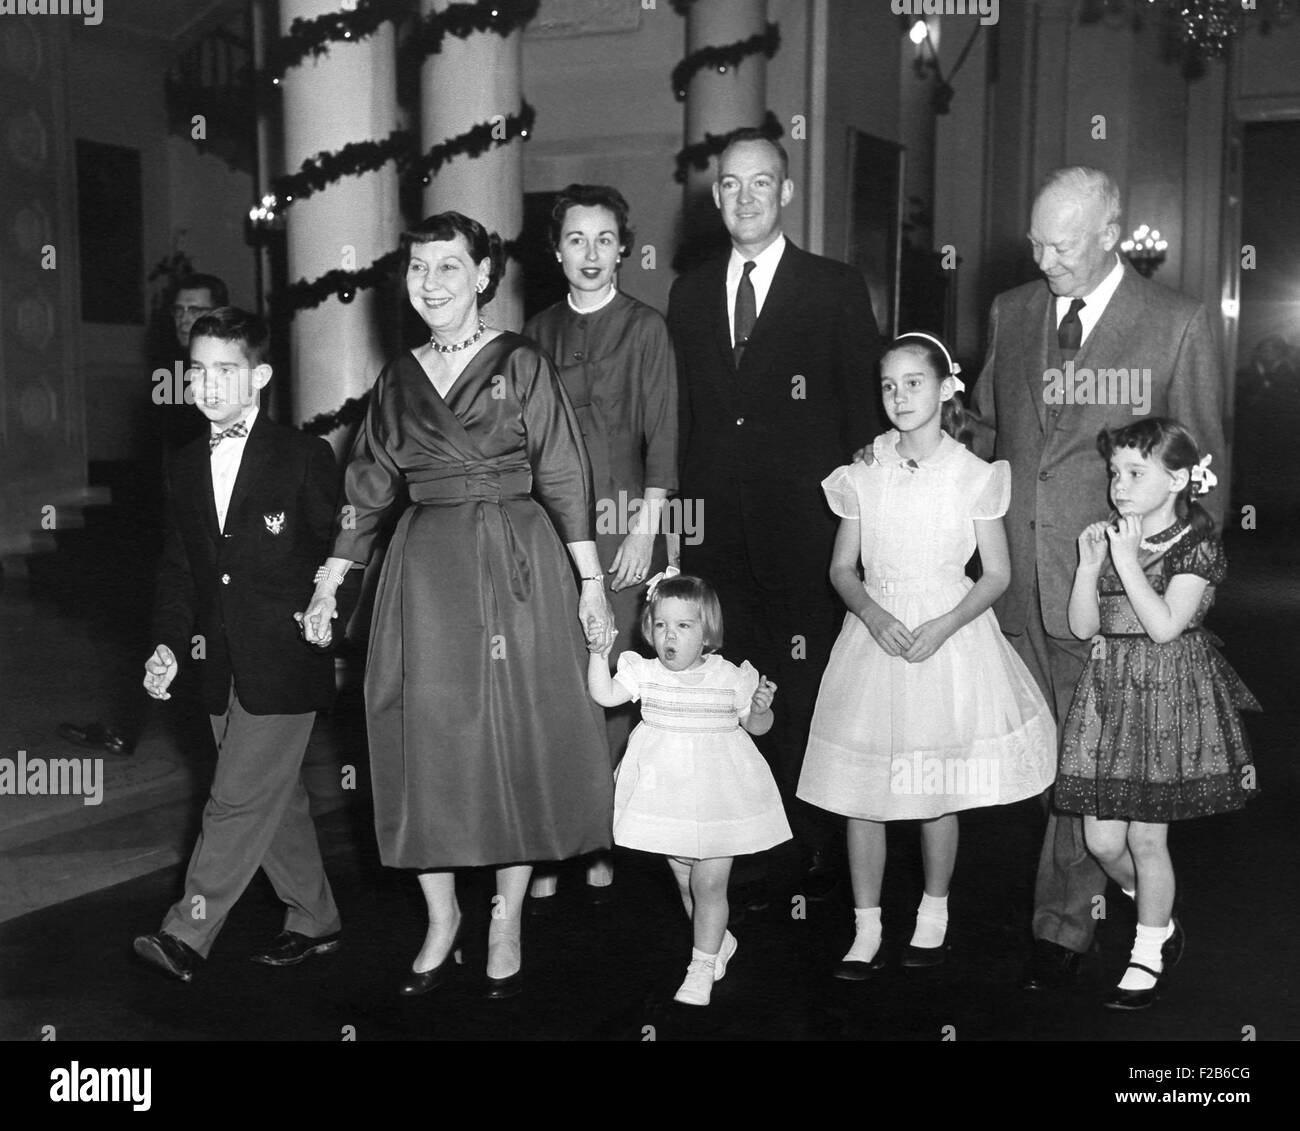 Eisenhower family Christmas at the White House. L-R: David, the First Lady, Barbara, Mary Jean, John, Barbara Ann, the President, and Susan. Ca. 1958. - (BSLOC 2014 16 112) Stock Photo